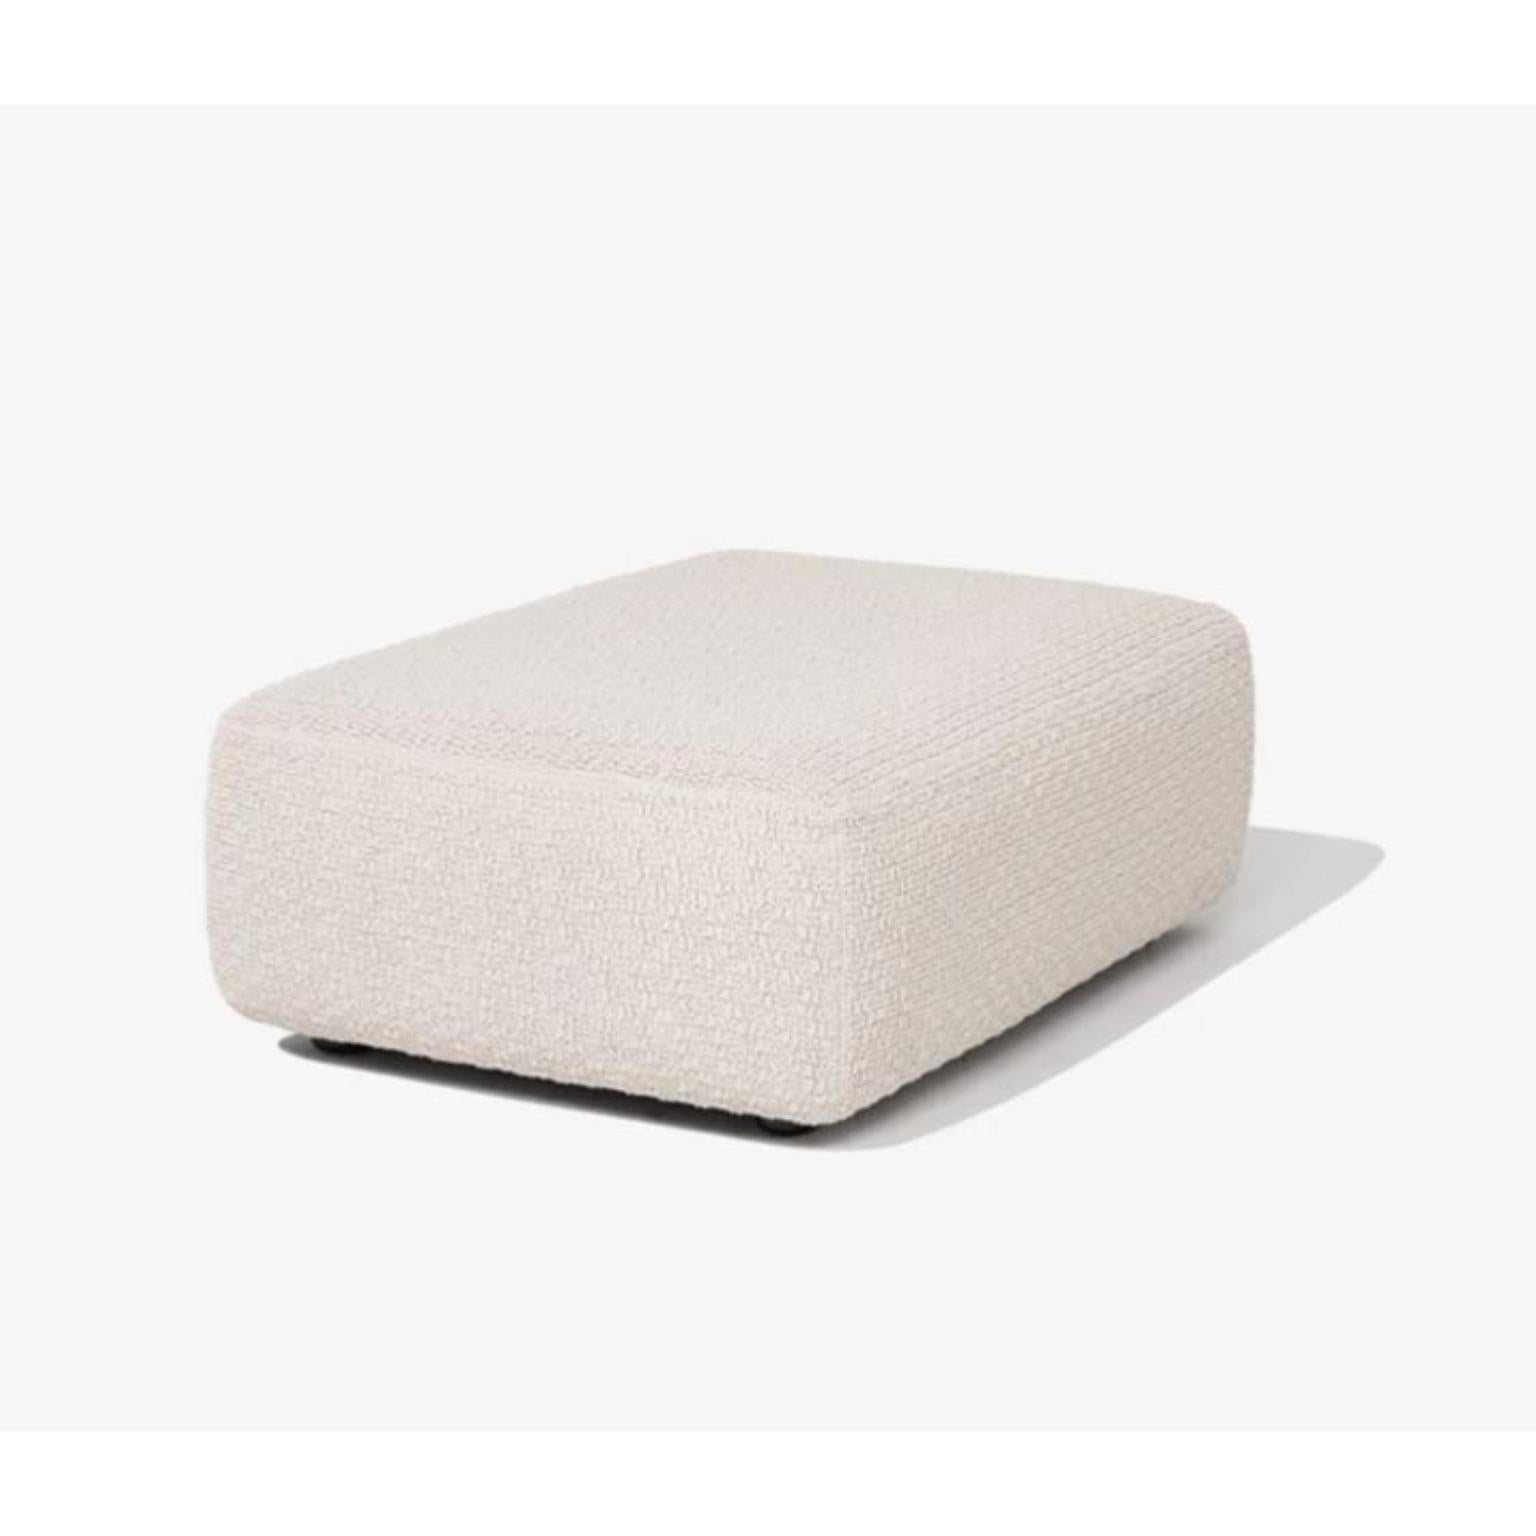 Dobra Small Pouf by Wentz
Dimensions: D 110 x W 78 x H 40 cm
Materials: Wooden structure, elastic straps, hypersoft foam and WE–KNIT coating (70% recycled PET + 30% elastane). Wooden feet with matte black paint and a rubberized finish on the bottom